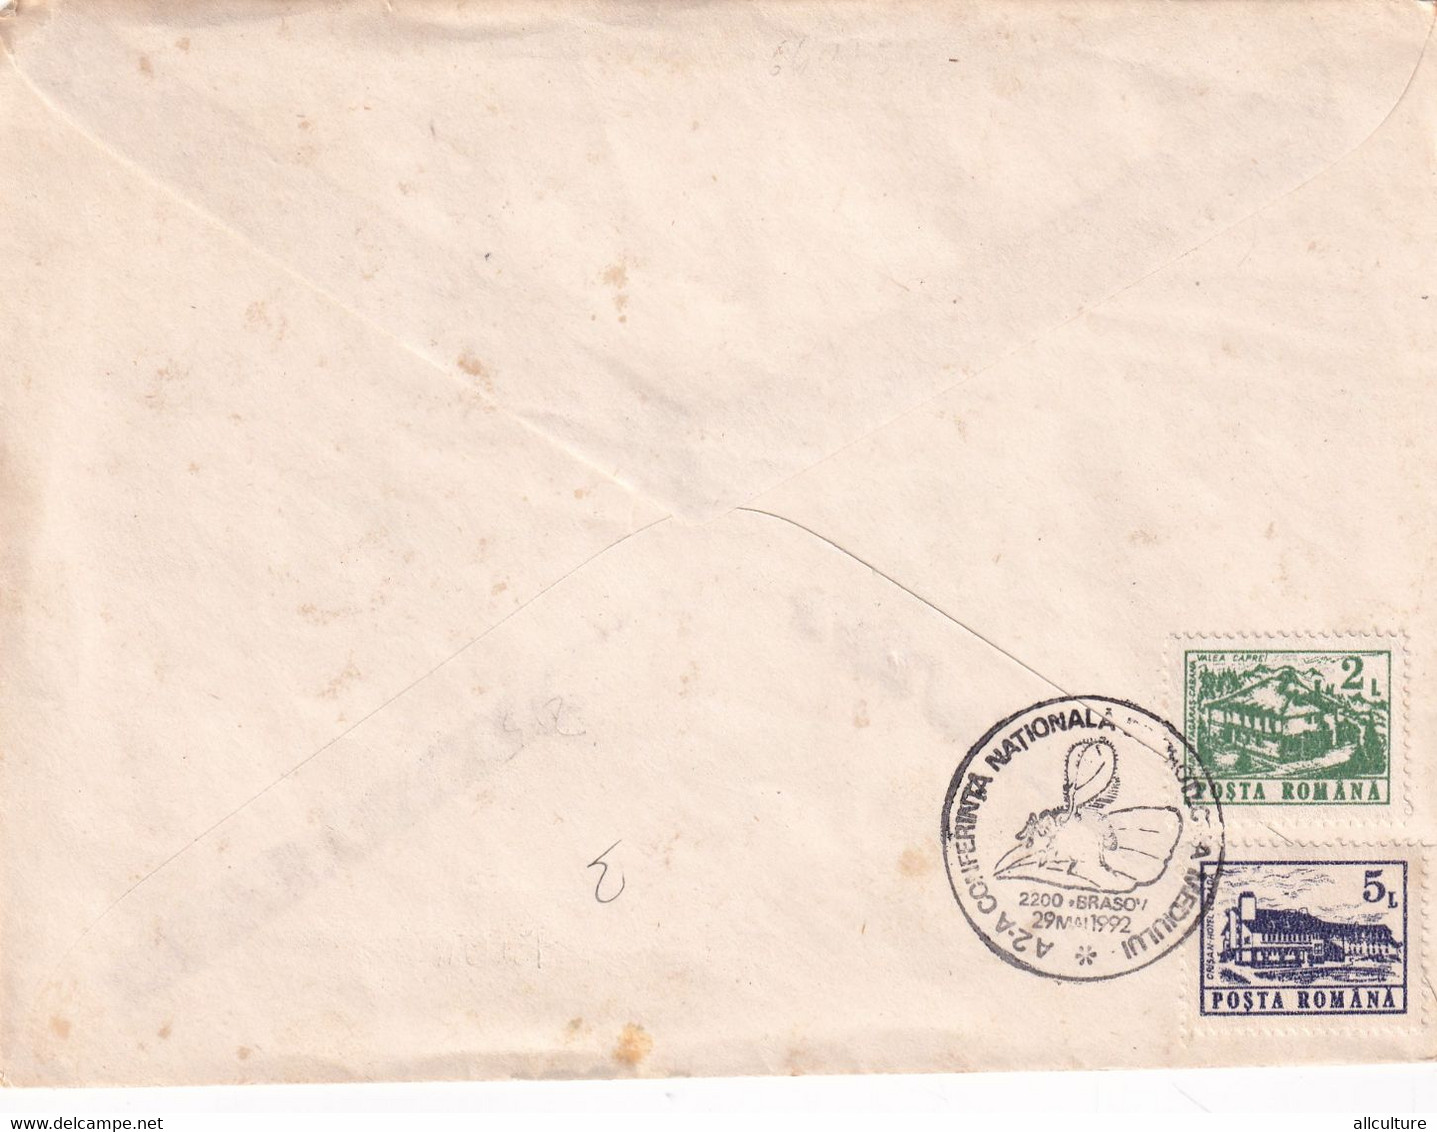 A12514 - NATIONAL ENVIRONMENTAL PROTECTION CONFERENCE BUTTERFLIES 1992 BRASOV,USED STAMPS ON COVER, ROMANIAN POSTAGE - Vlinders